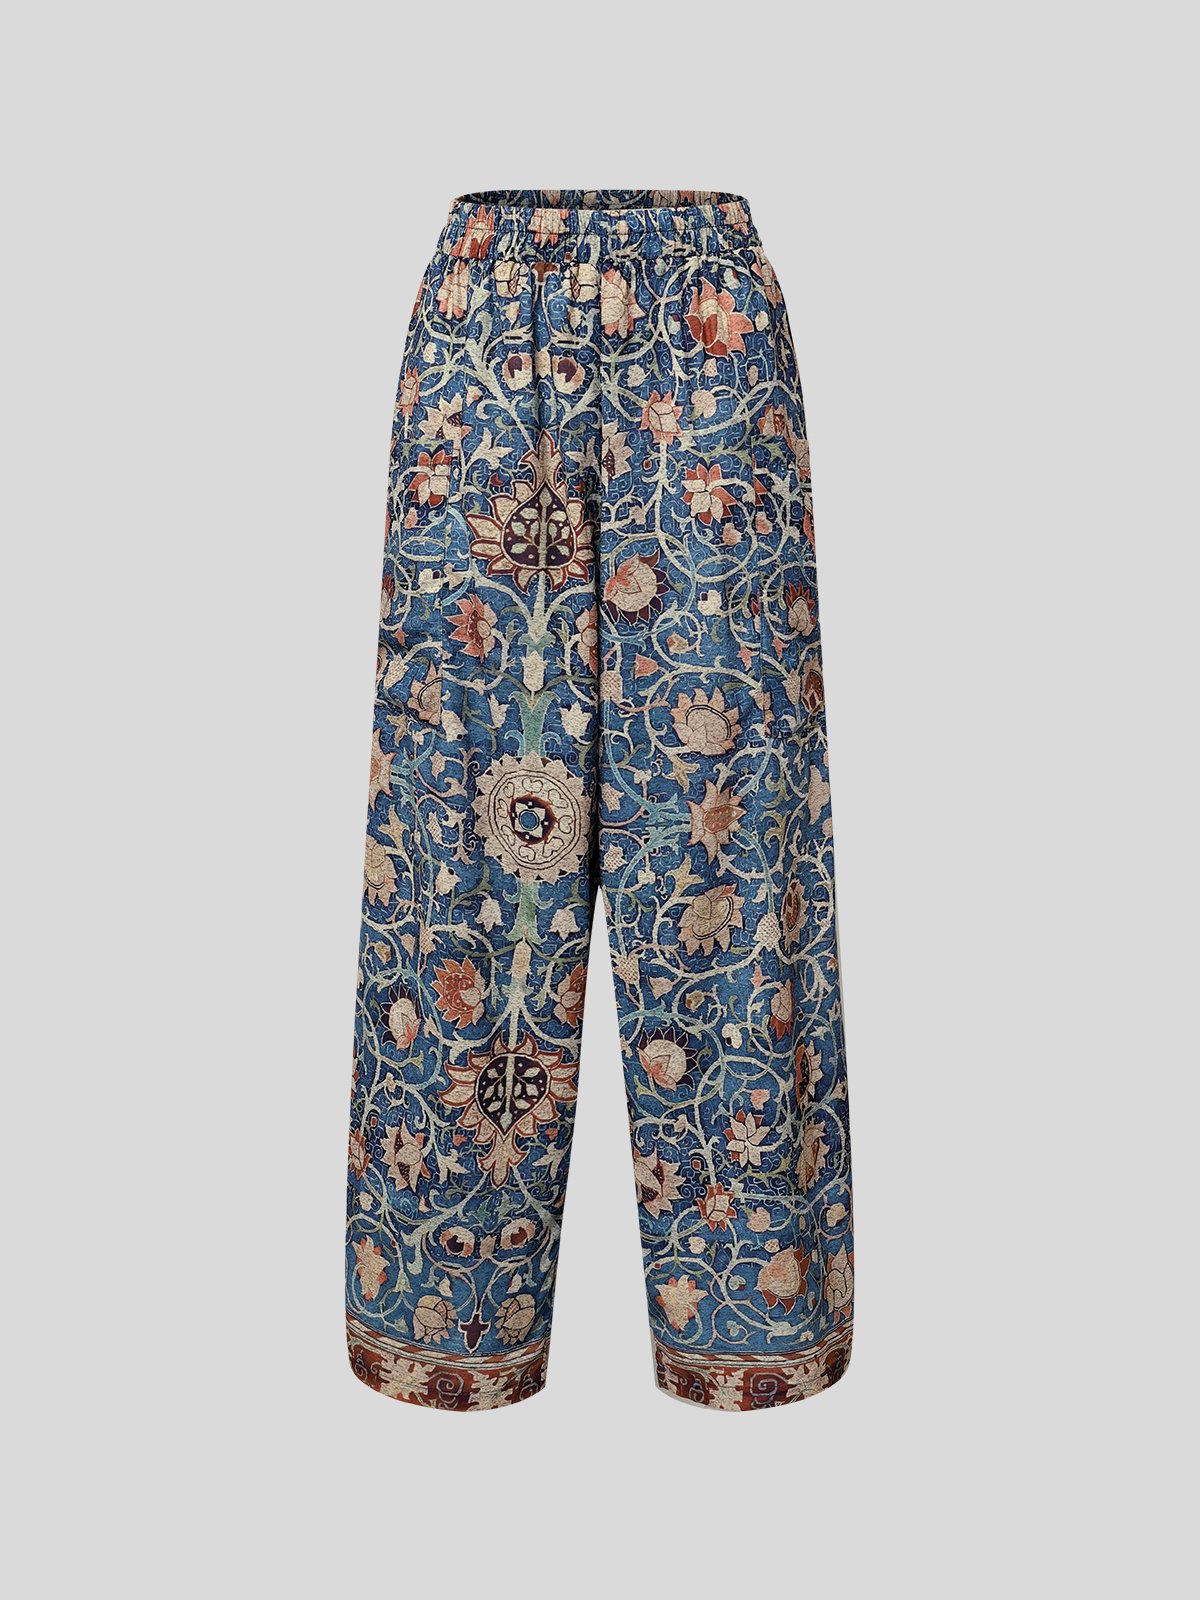 Ethnic Cotton-Blend Casual Casual Pants